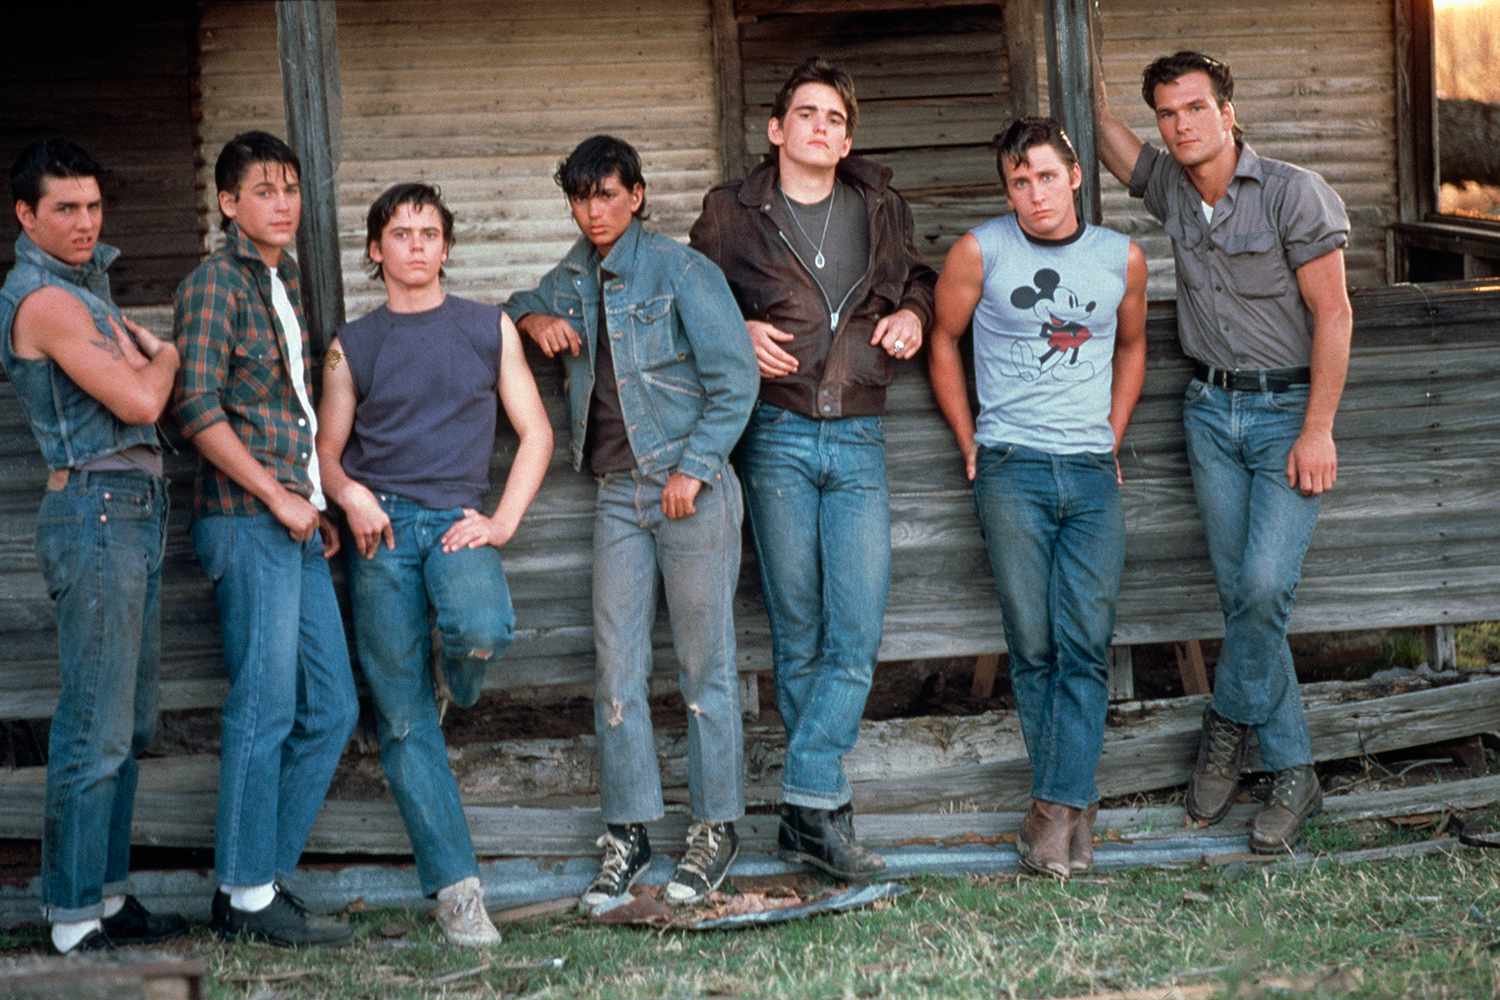 American actors Tom Cruise, Rob Lowe, C. Thomas Howell, Ralph Macchio, Matt Dillon, Emilio Estevez and Patrick Swayze on the set of The Outsiders, directed and produced by Francis Ford Coppola.